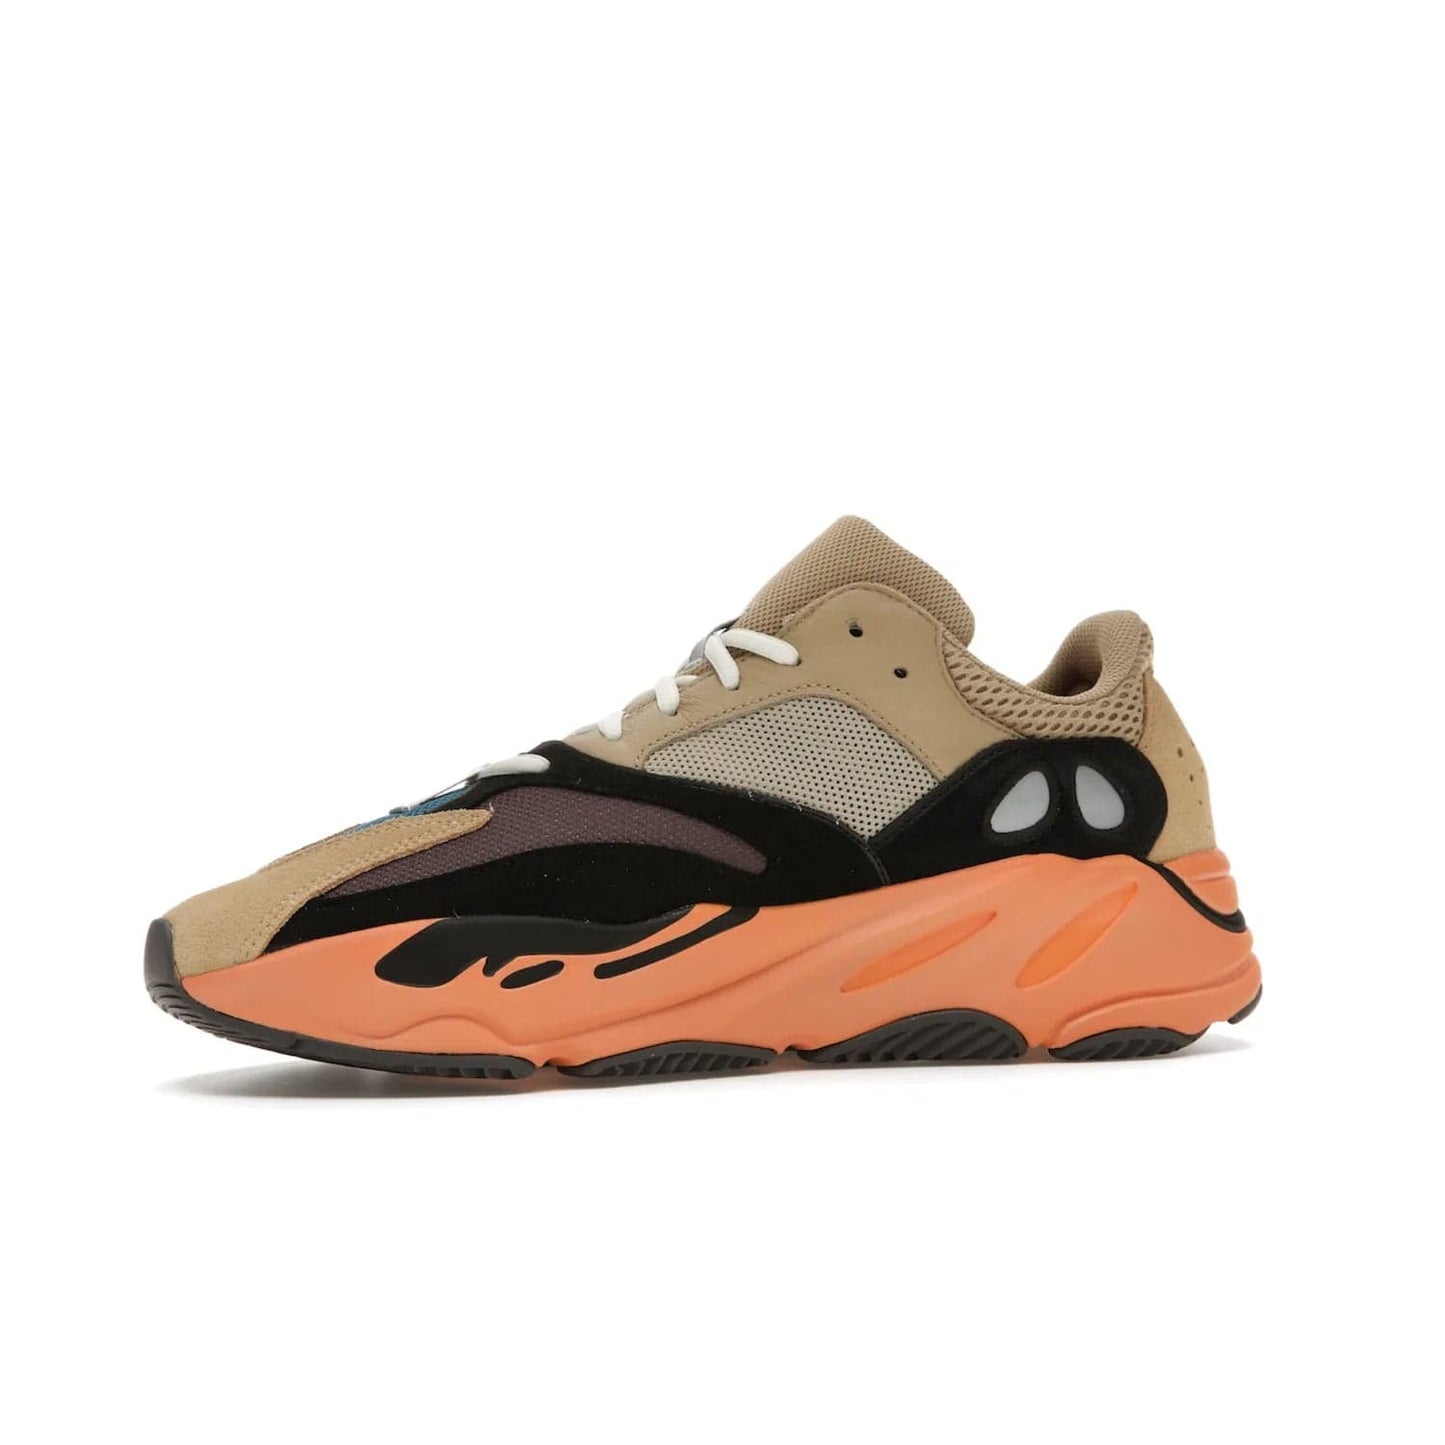 adidas Yeezy Boost 700 Enflame Amber - Image 17 - Only at www.BallersClubKickz.com - Adidas Yeezy Boost 700 Enflame Amber: Eye-catching design with pale yellow, brown, teal, and orange! Get yours in June 2021.